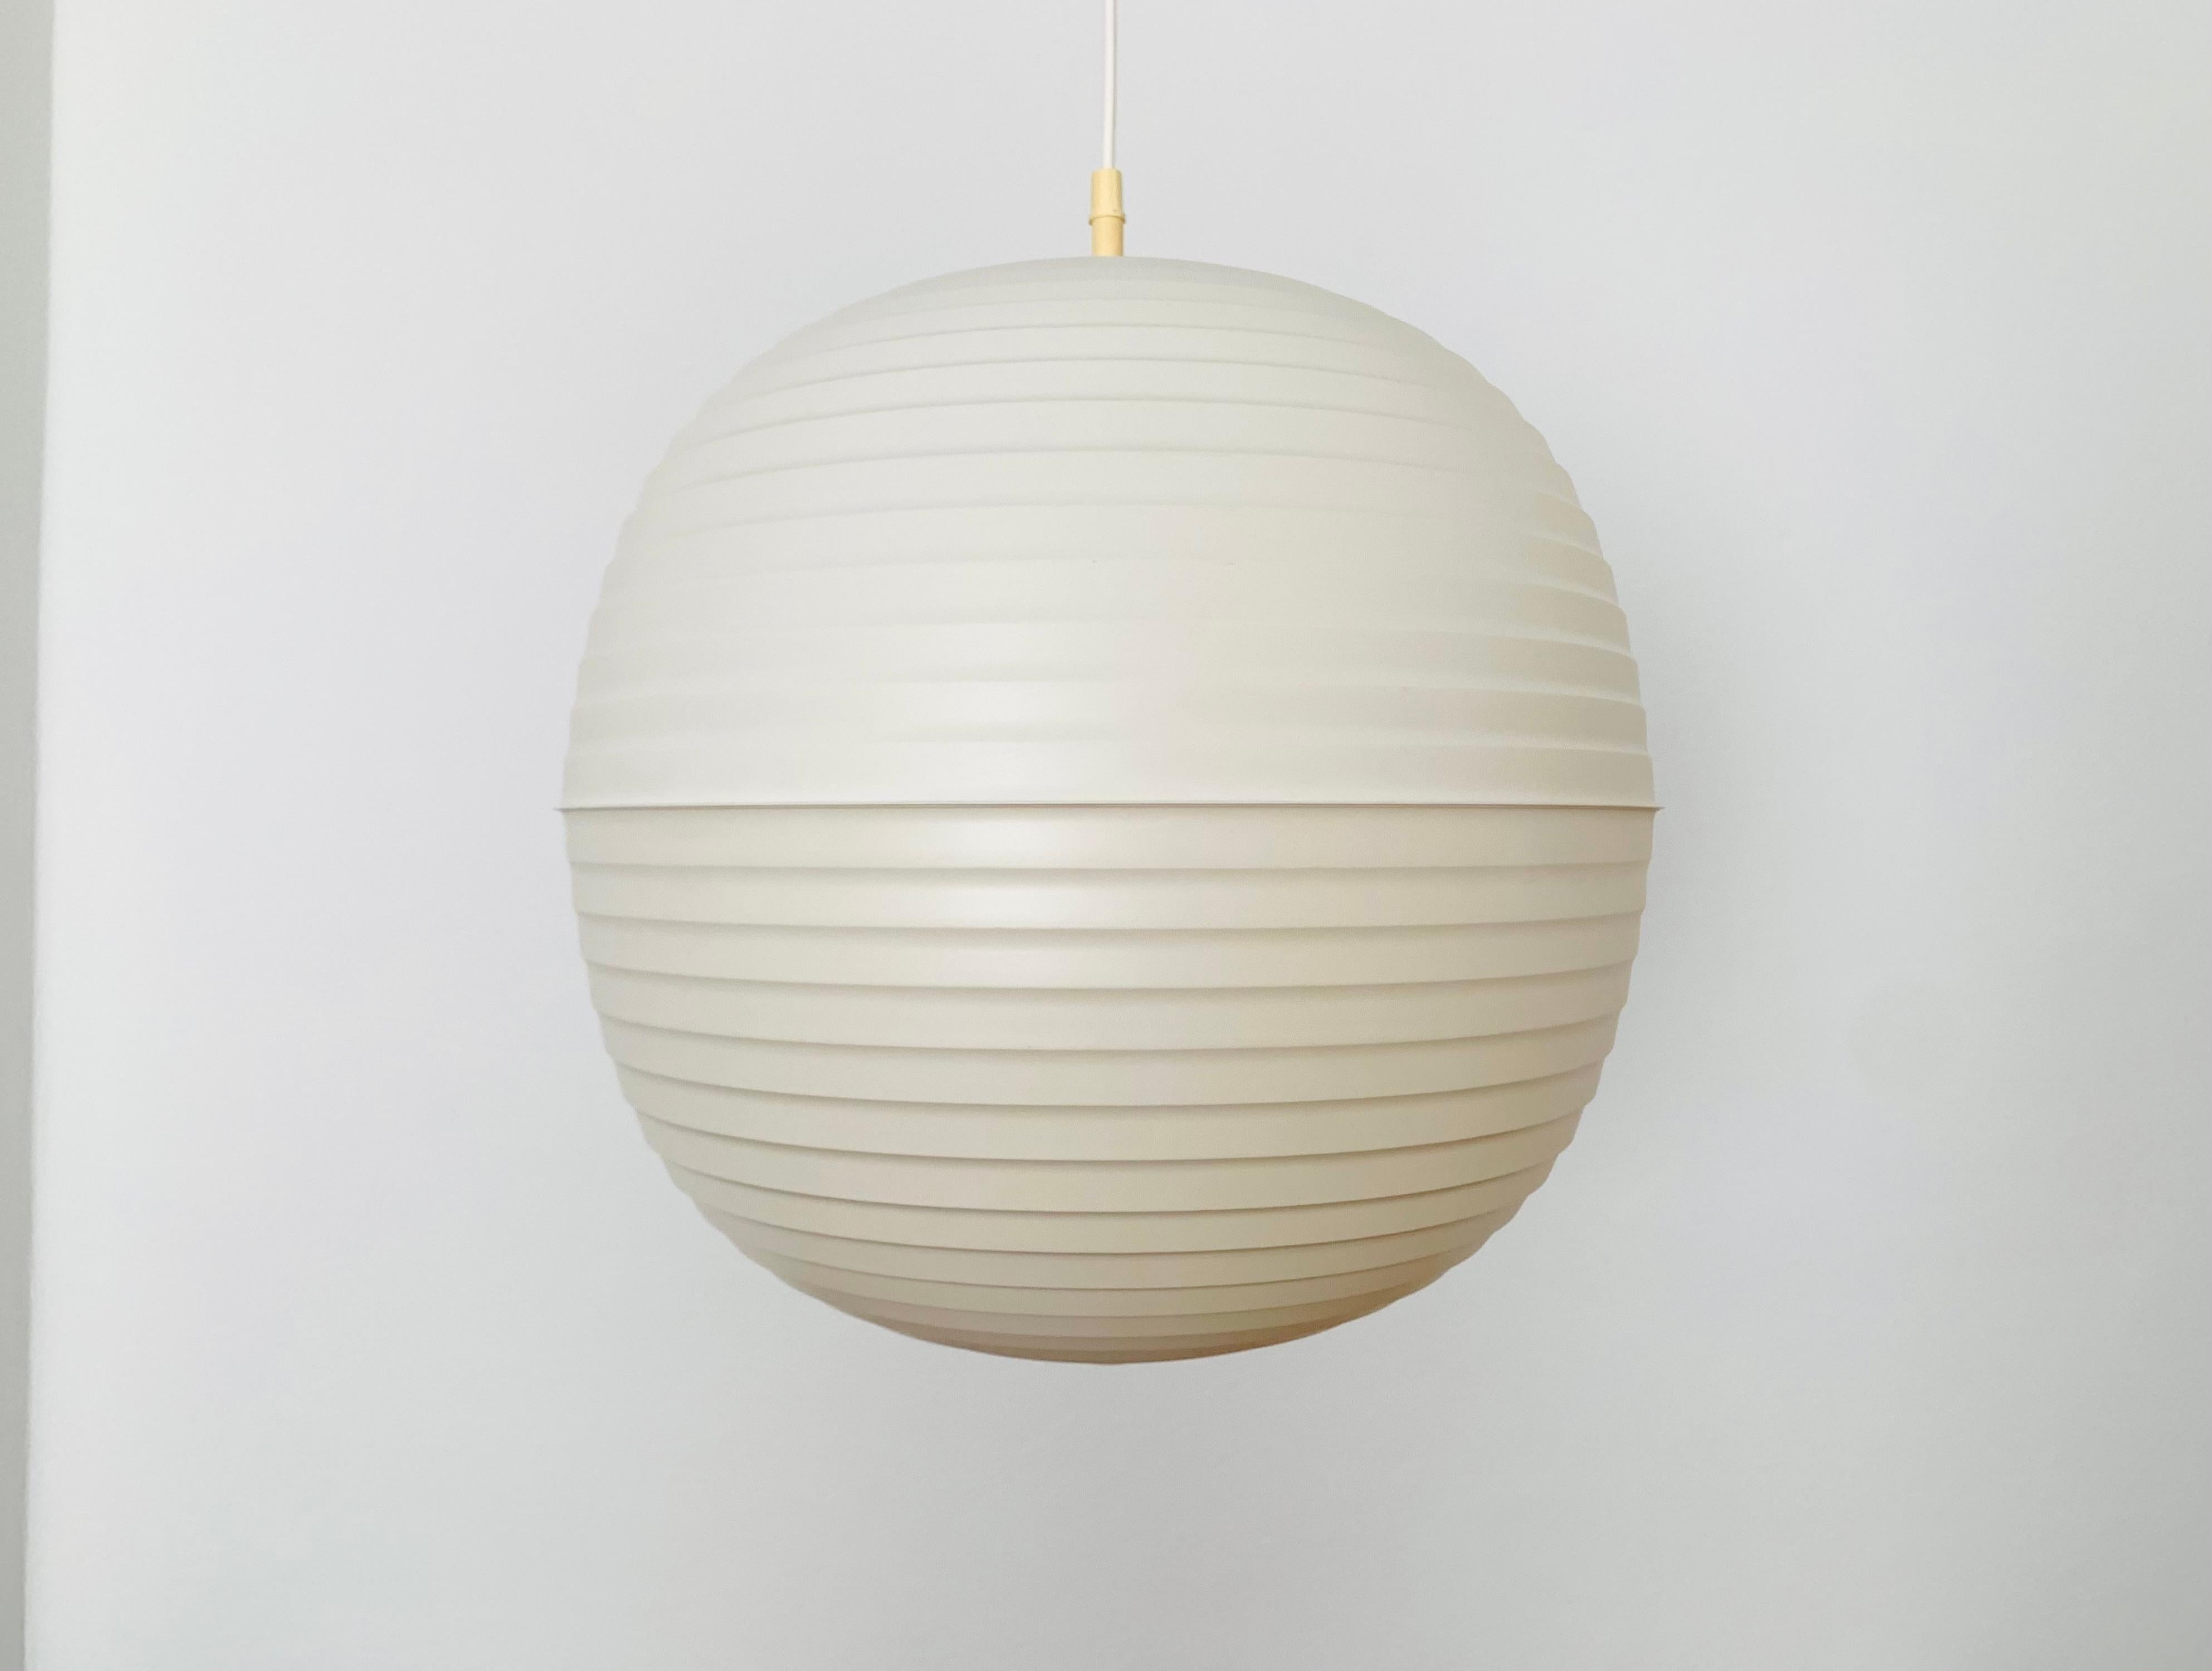 Very nice pendant lamp from the 1960s.
Wonderful and contemporary design.
A highlight for every room.

Manufacturer: Erco
Design: Aloys Gangkofner

Condition:

Very good vintage condition with minimal signs of wear consistent with